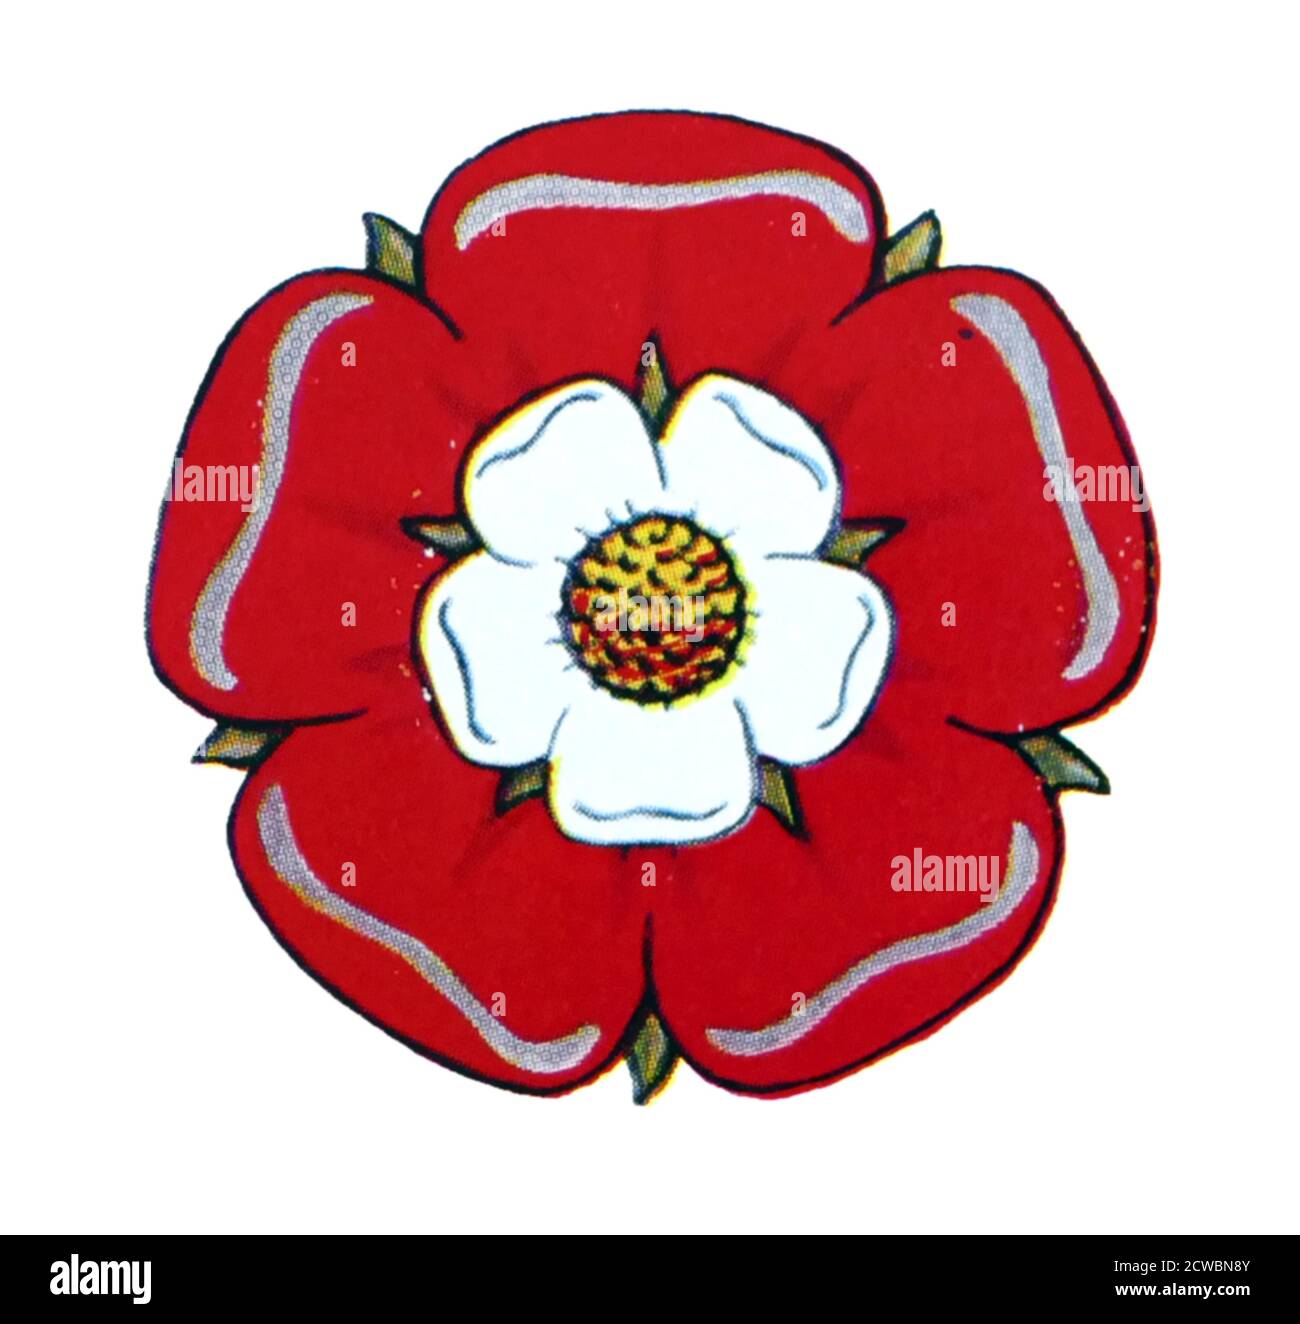 Illustration depicting a Red Rose of Lancastrians during the Wars of the  Roses, the civil war between the Houses of Lancaster and York that extended  across England in the latter half of